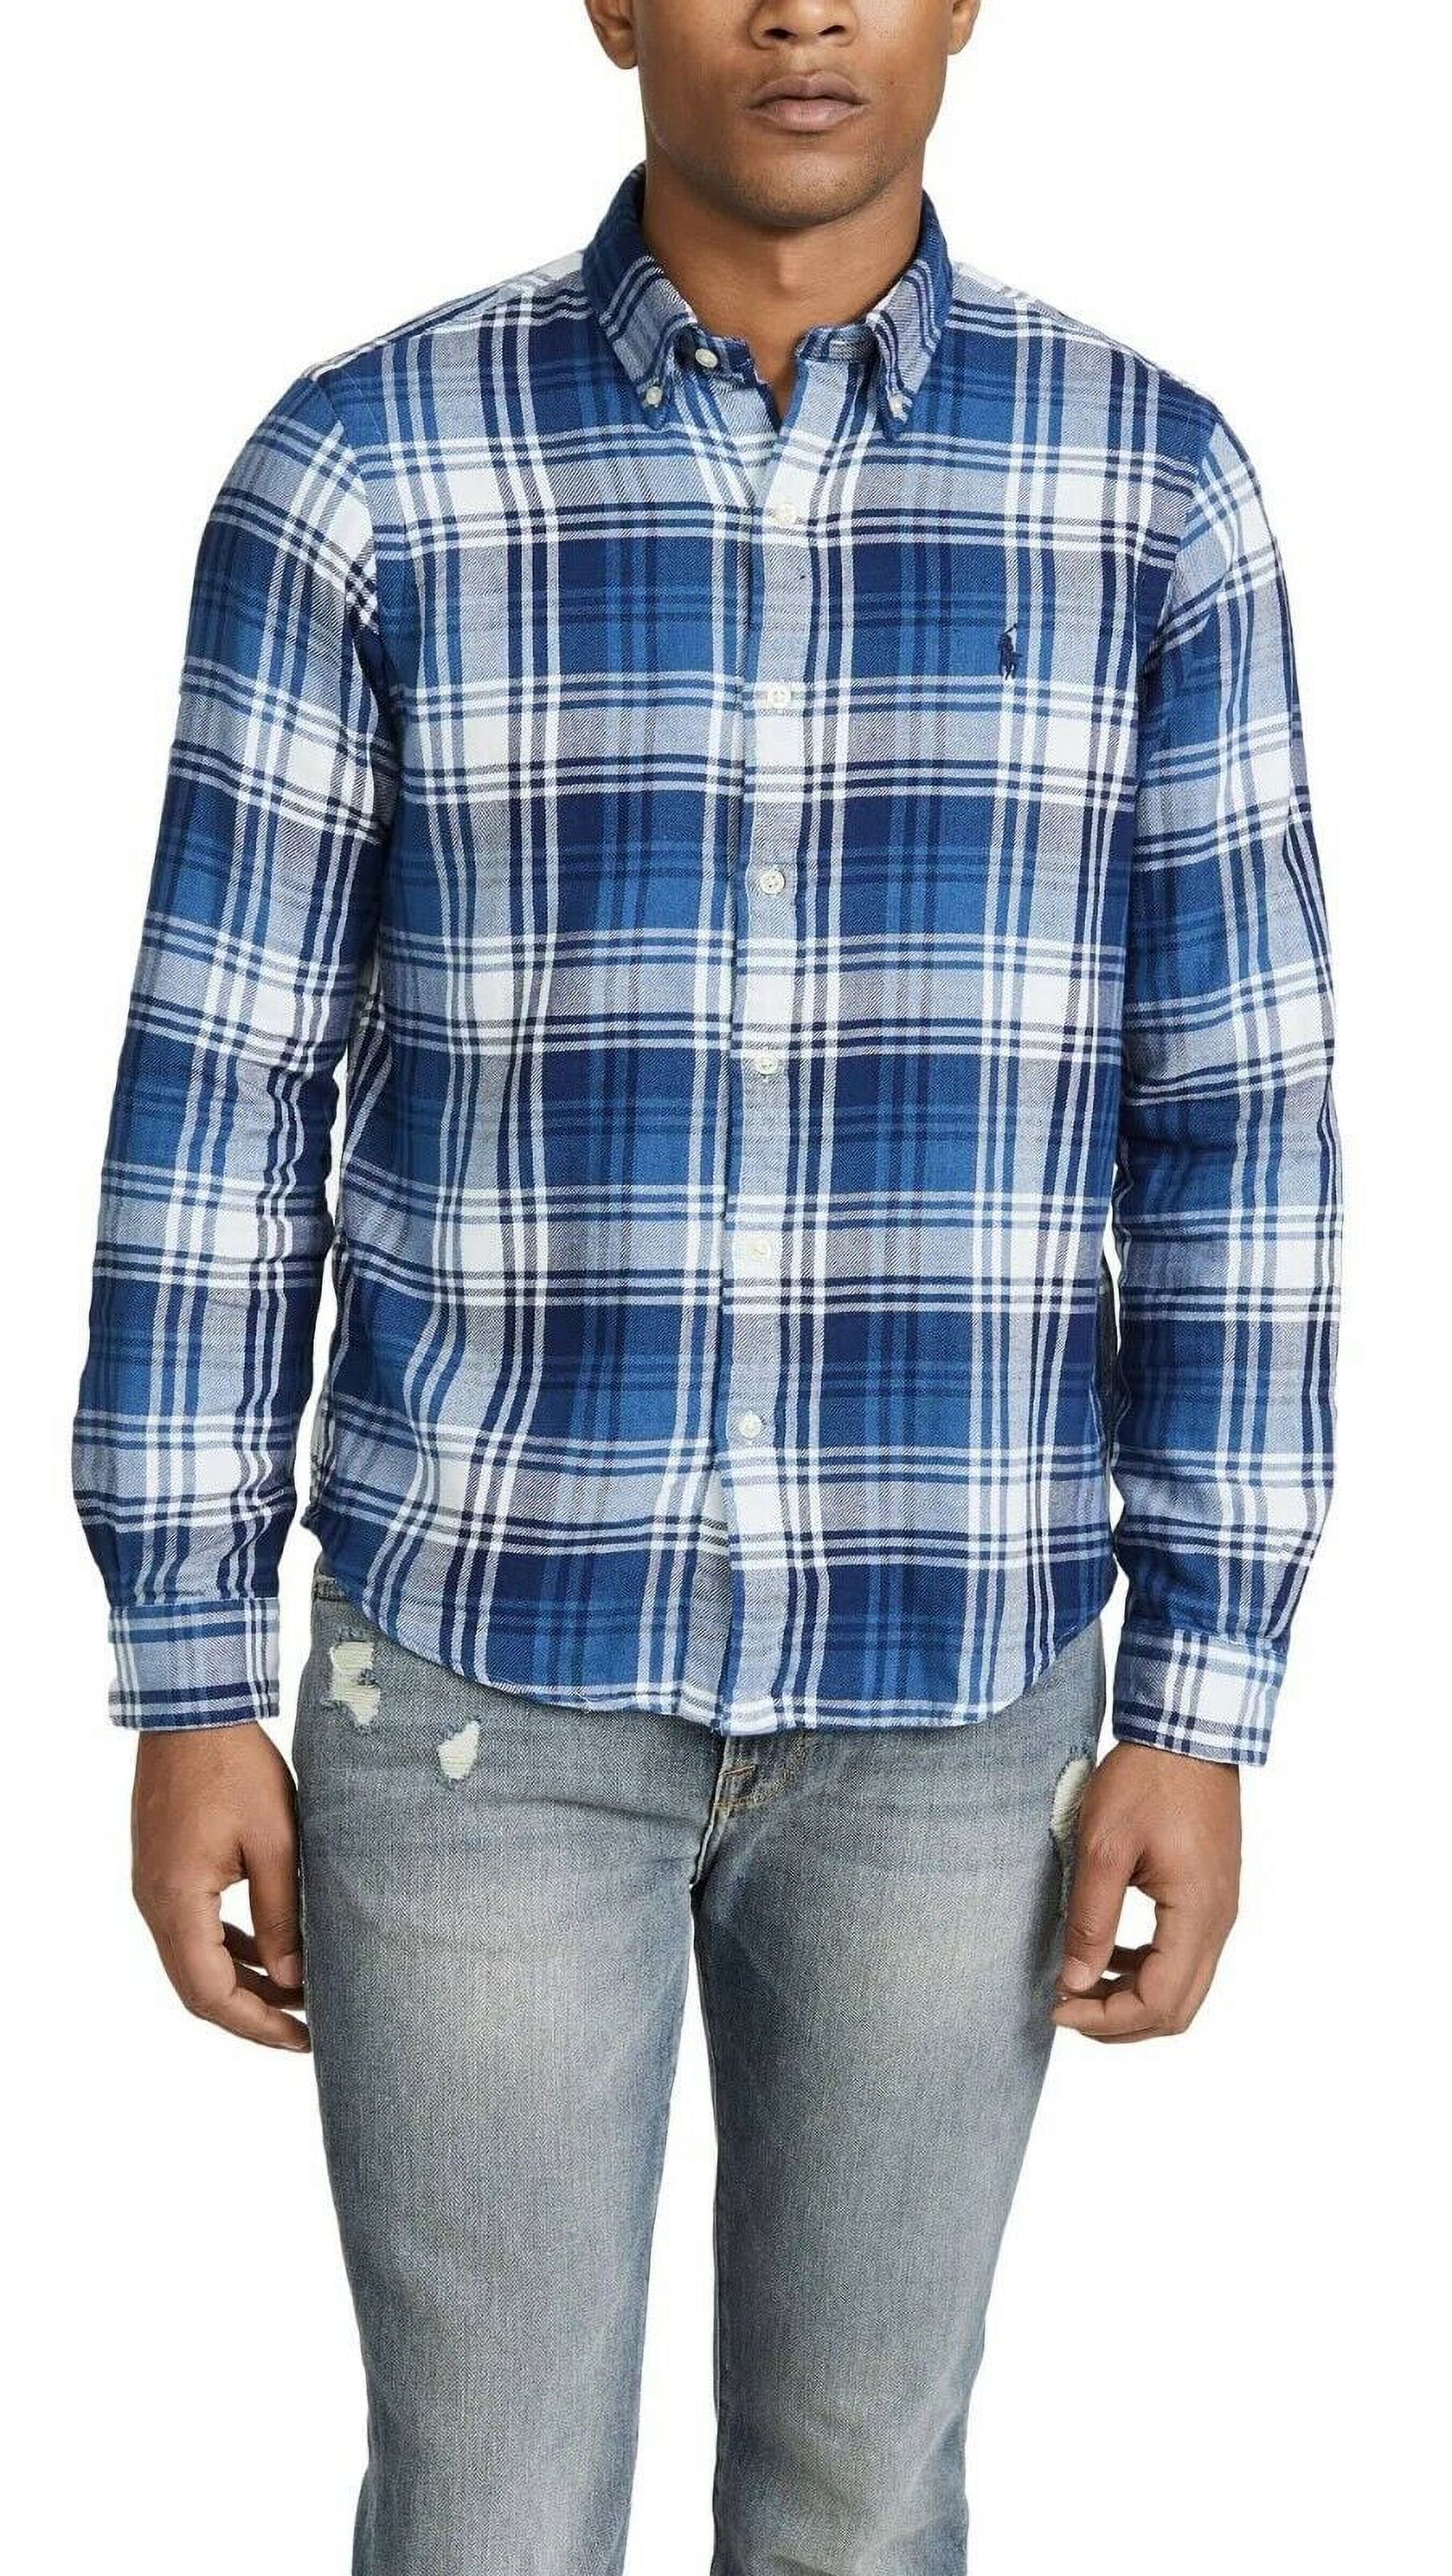 Polo Ralph Lauren Navy White Long Sleeves Flannel Plaid Shirt Blue/White-Size XS - image 1 of 6